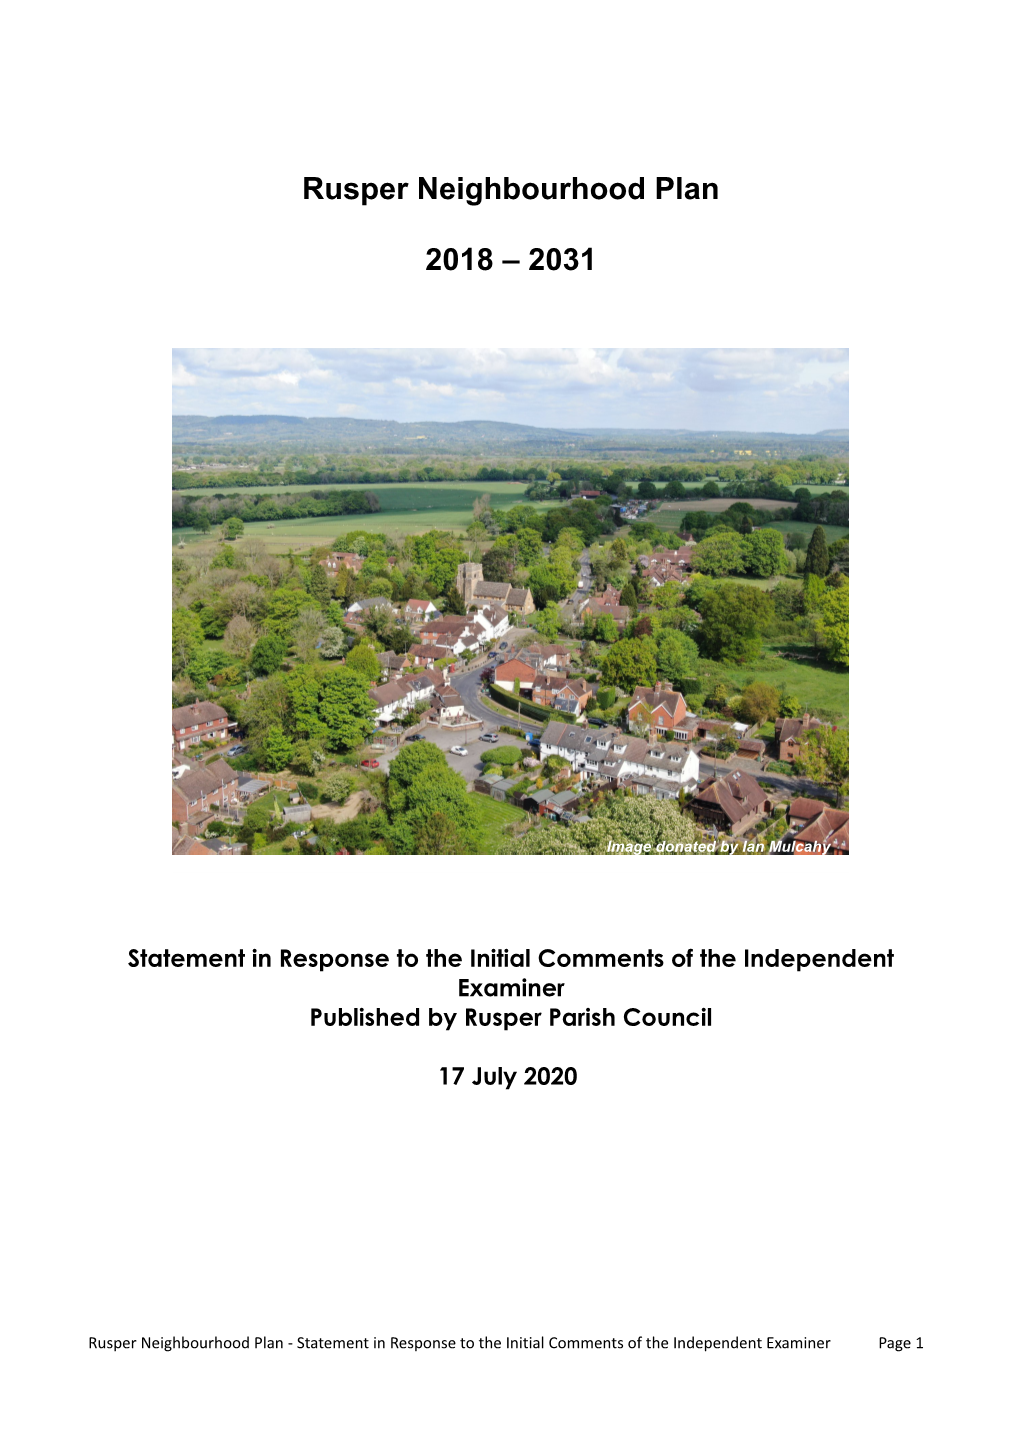 Rusper Neighbourhood Plan 2018 – 2031 Statement in Response to the Initial Comments of the Independent Examiner Contents Rusper Neighbourhood Plan 2018 – 2031